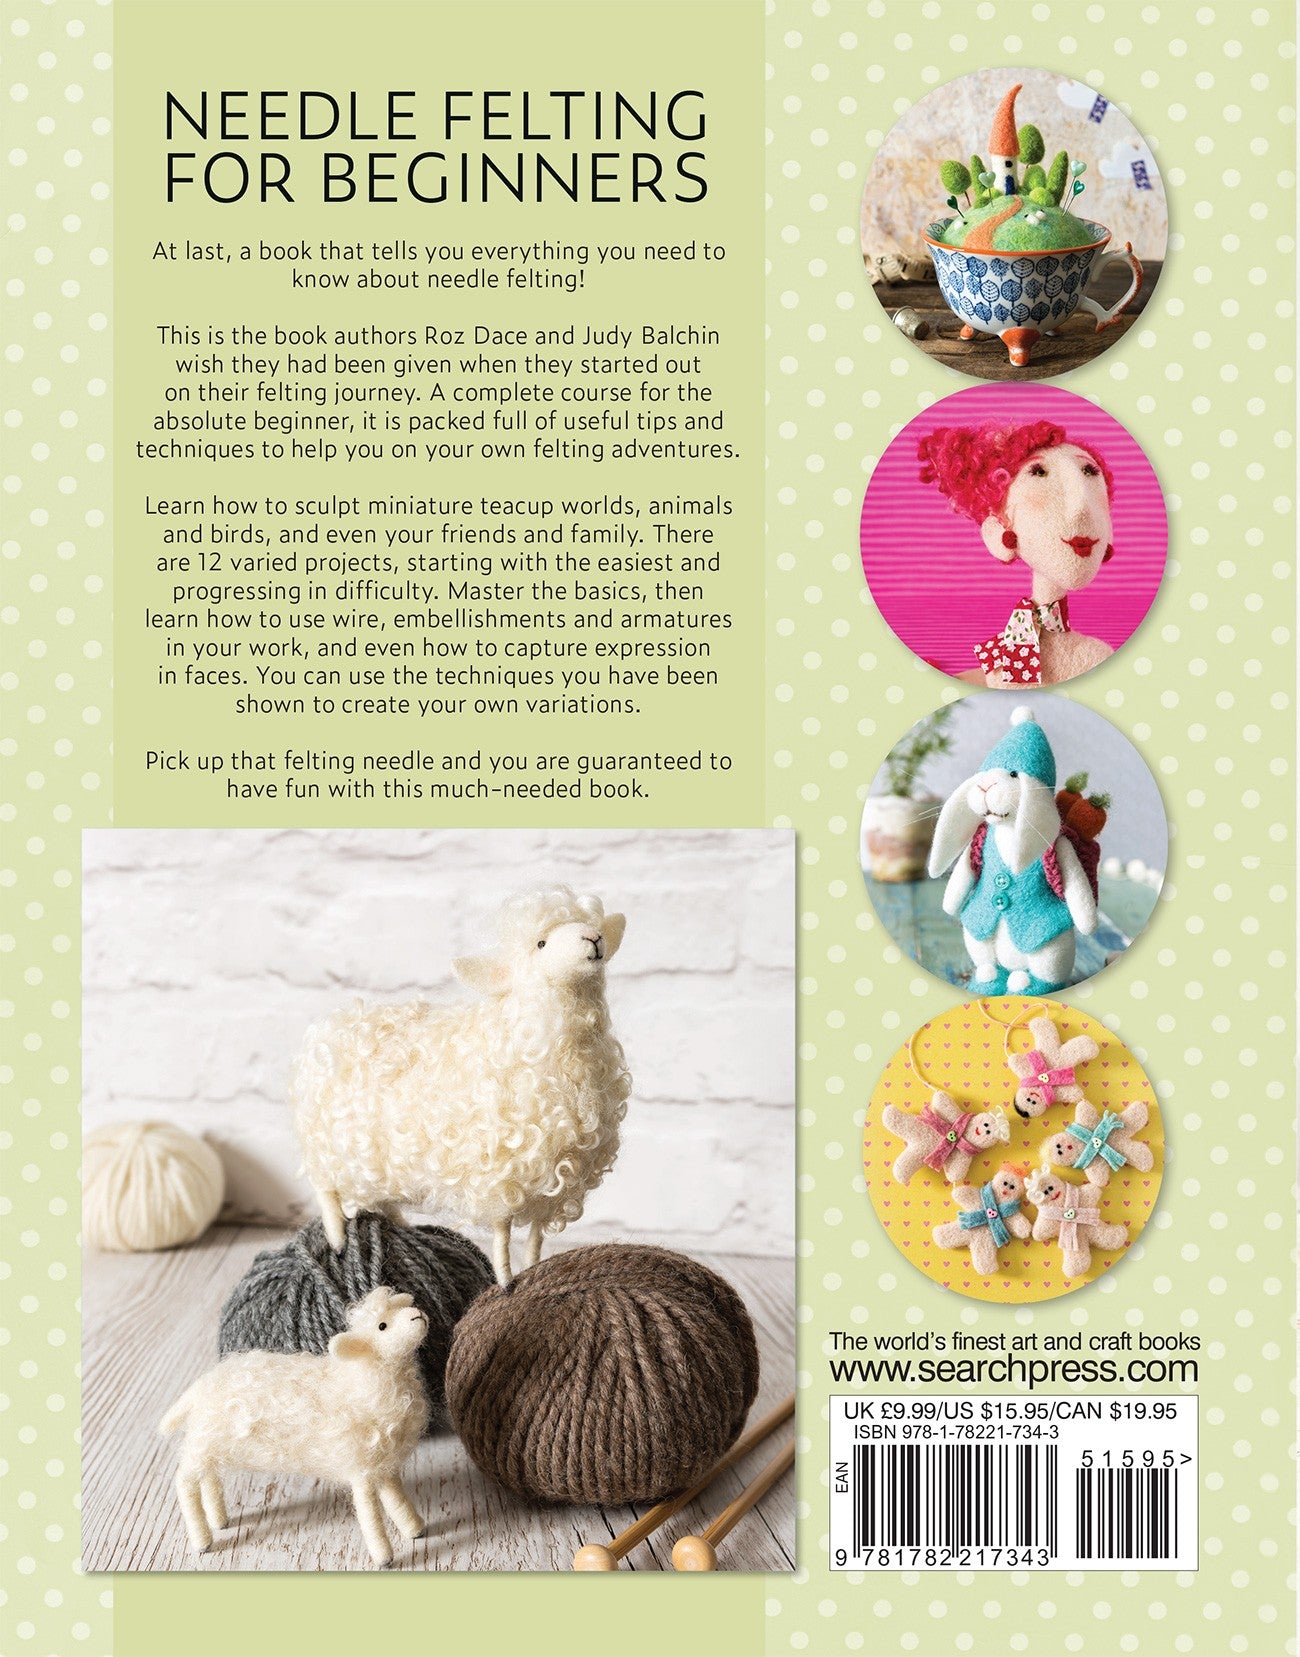 Needle Felting for Beginners: How to Sculpt with Wool [Book]